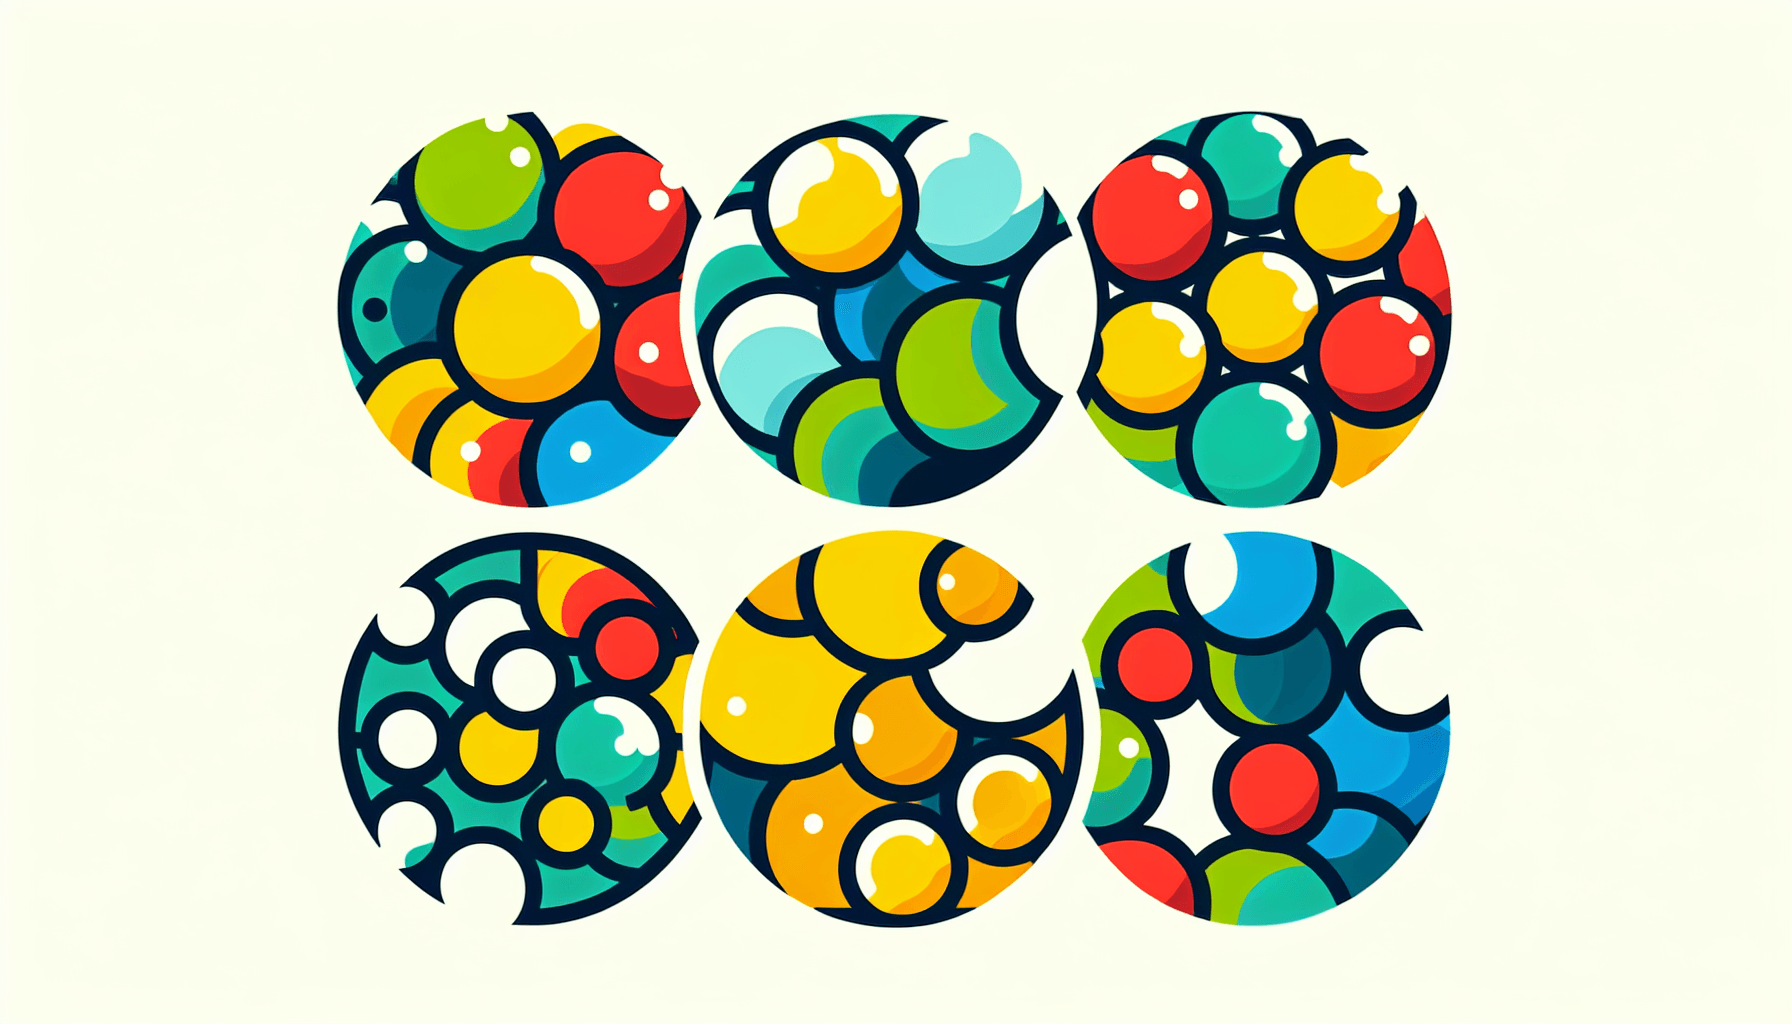 Circles in flat illustration style and white background, red #f47574, green #88c7a8, yellow #fcc44b, and blue #645bc8 colors.